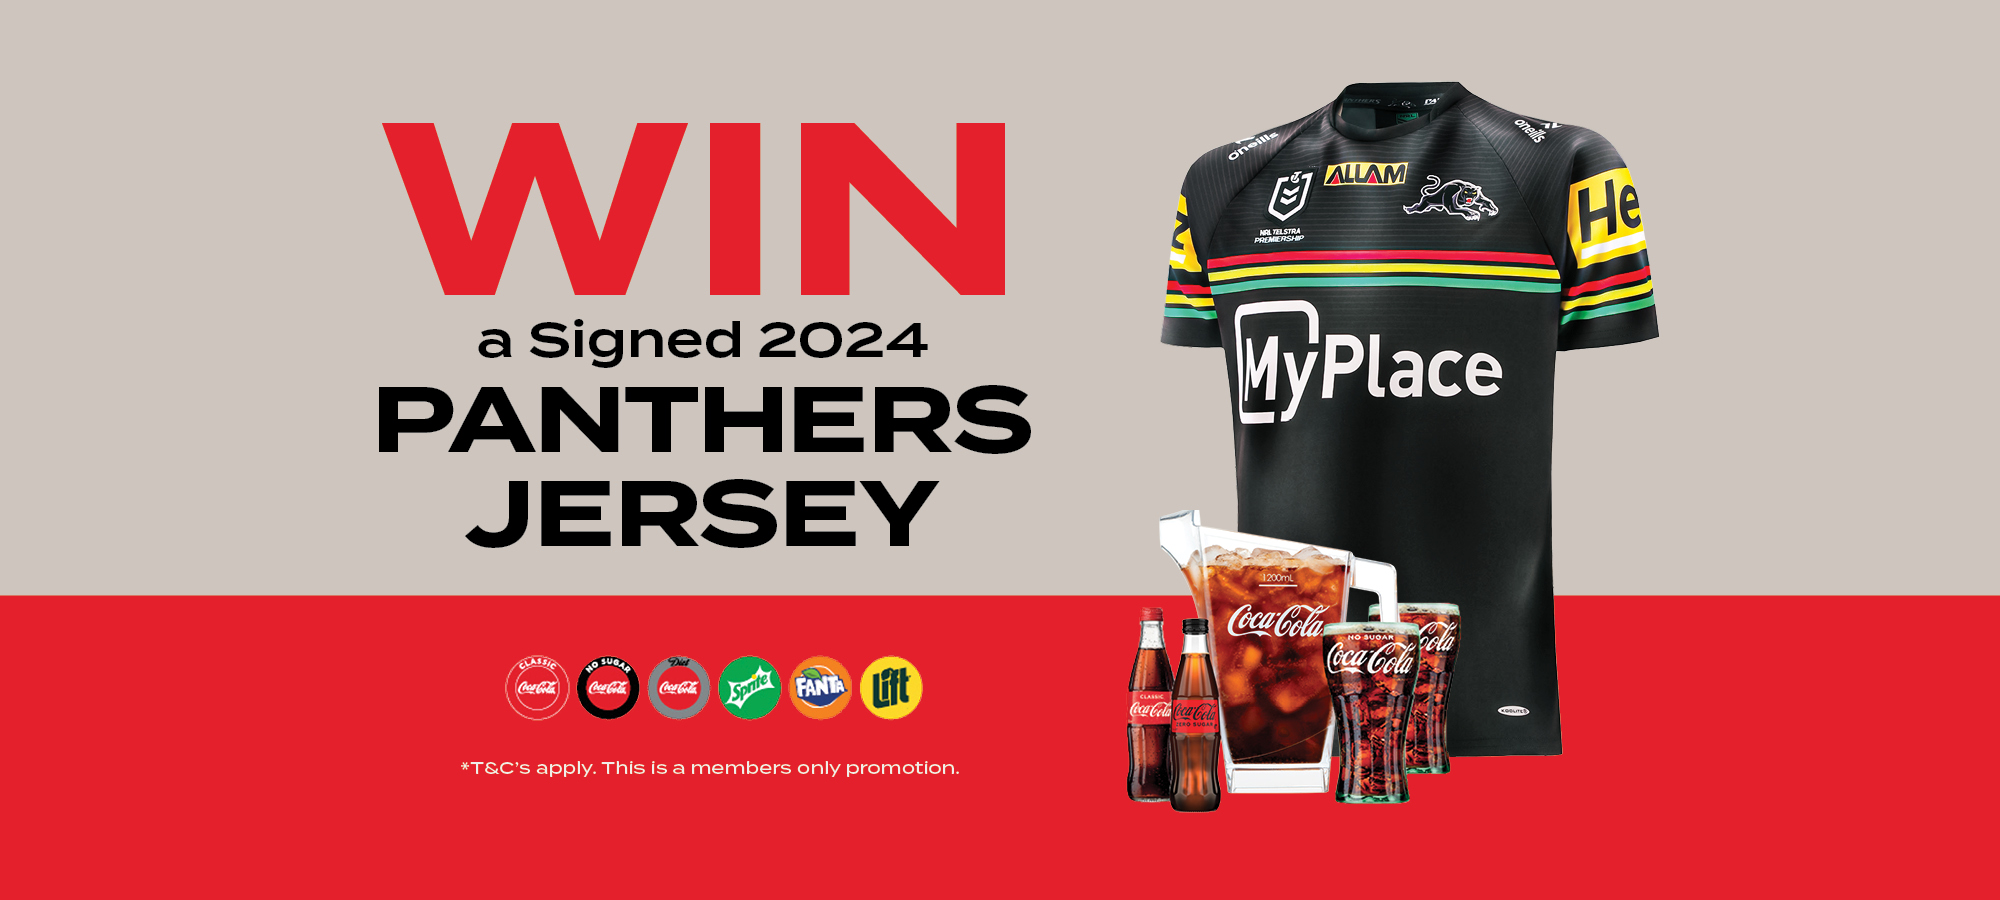 Win a Signed Panthers Jersey